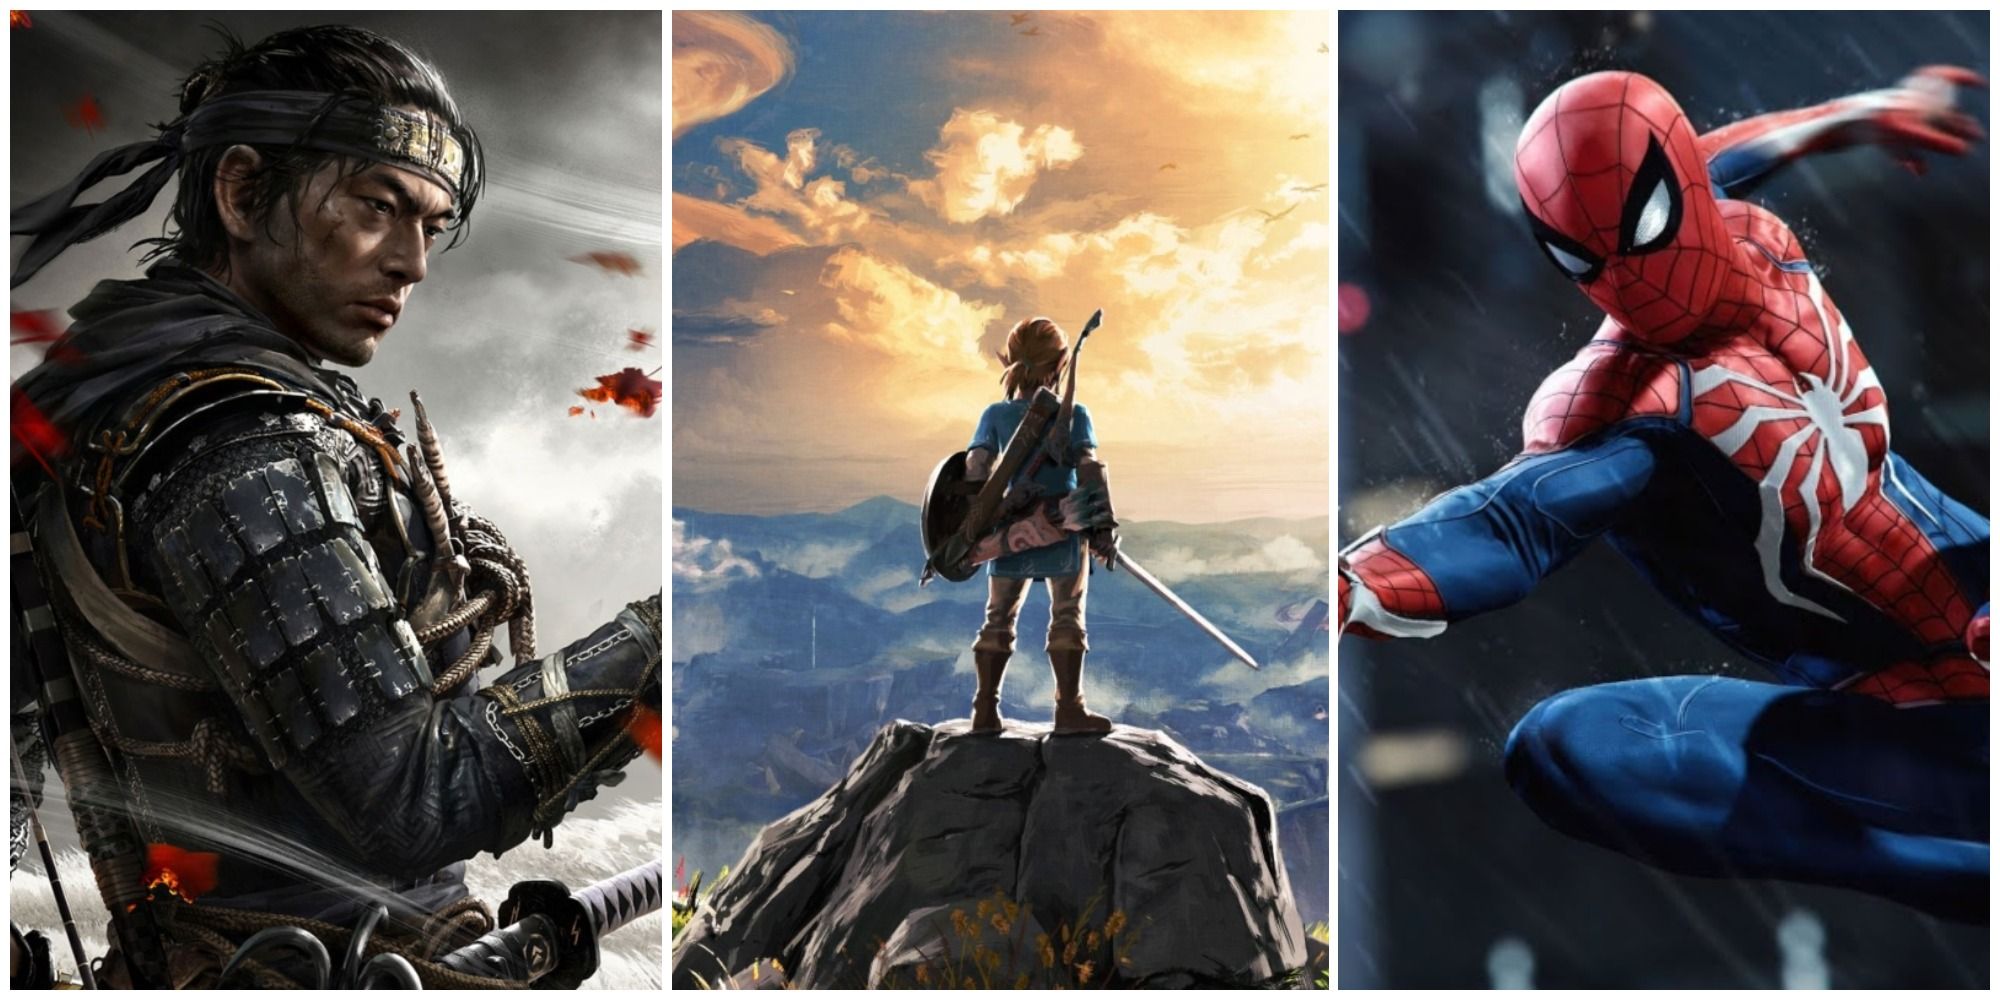 A collage for the article, featuring Spider-Man, Ghost of Tsushima, and Breath of the Wild